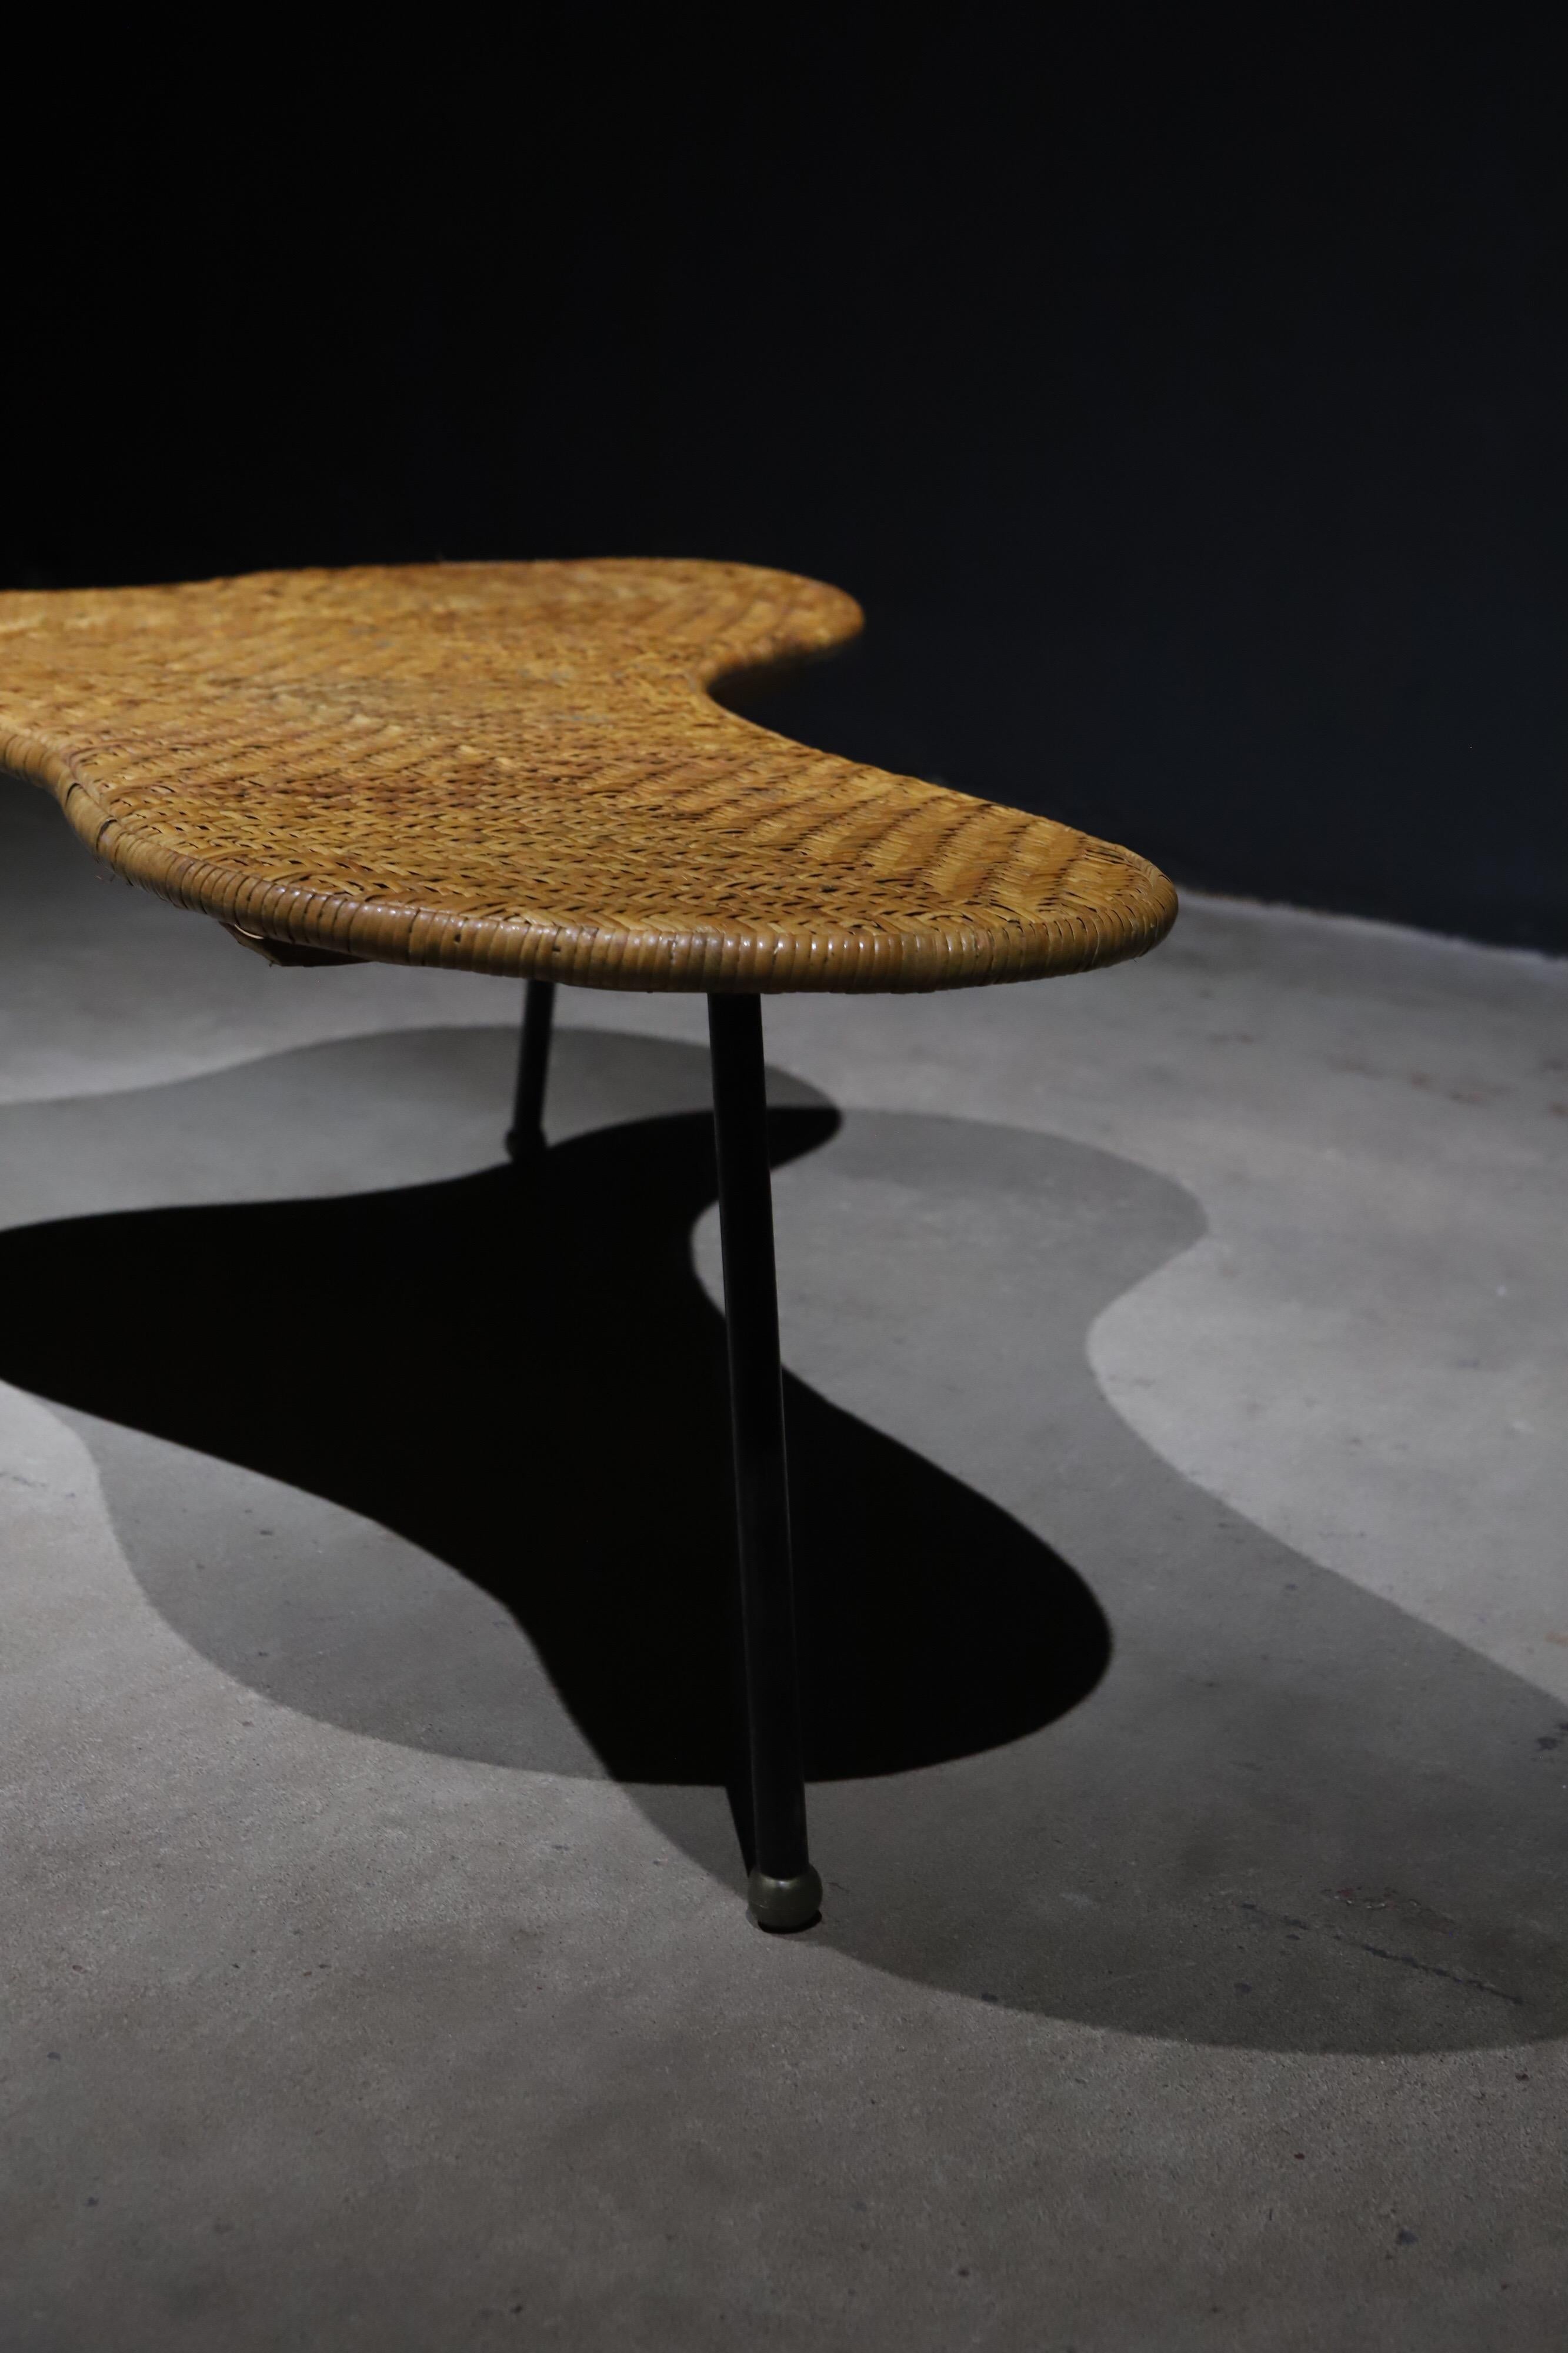 Wicker Biomorphic Cocktail Table 6